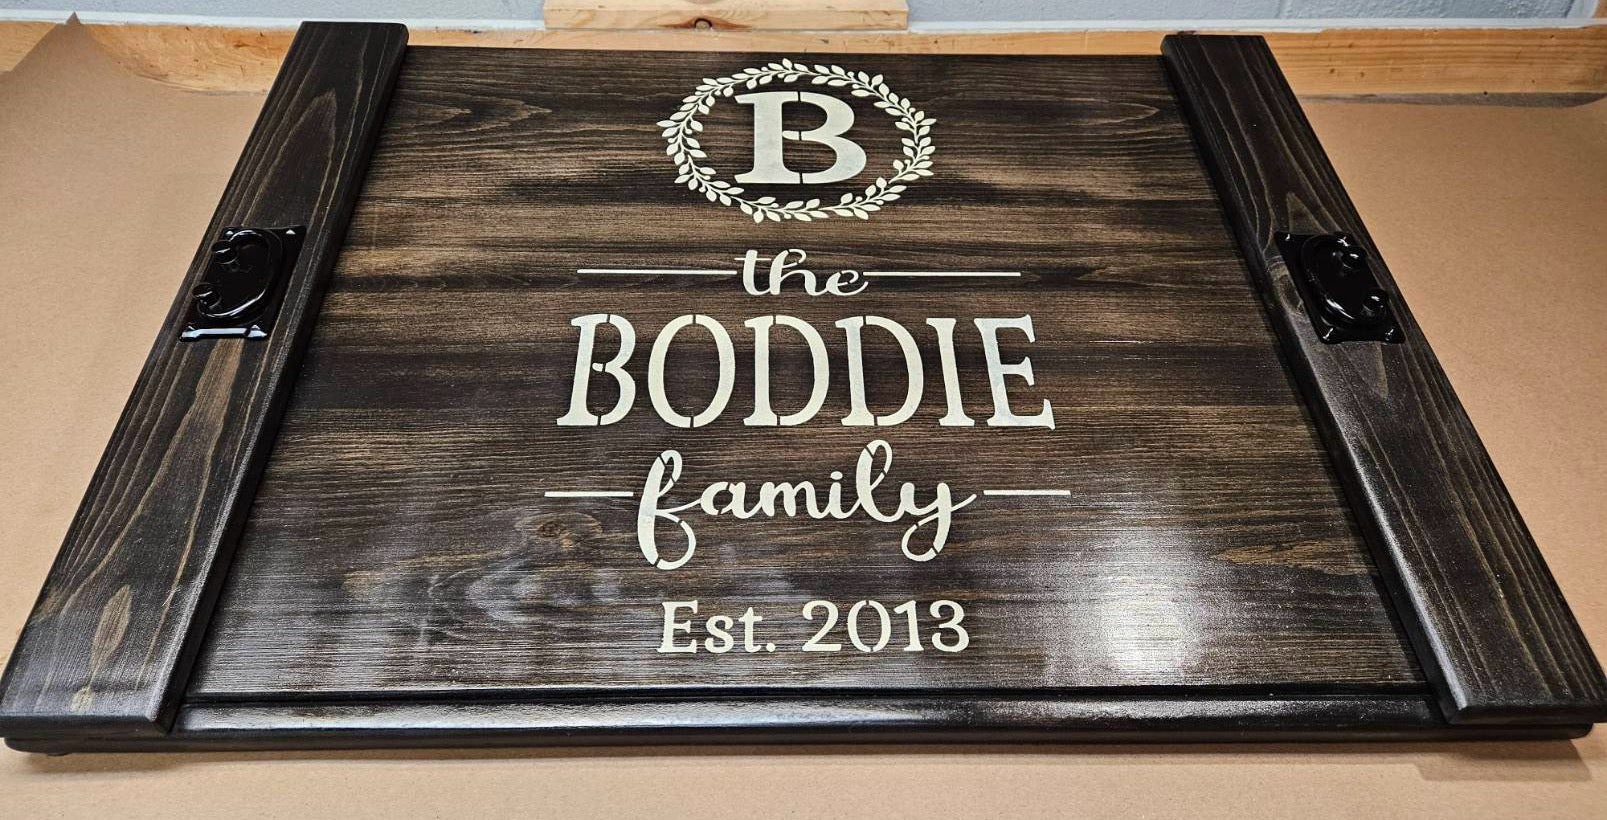 DECORATIVE AND PERSONALIZED WOOD STOVE COVER, NOODLE BOARDS — Designz by  Heather